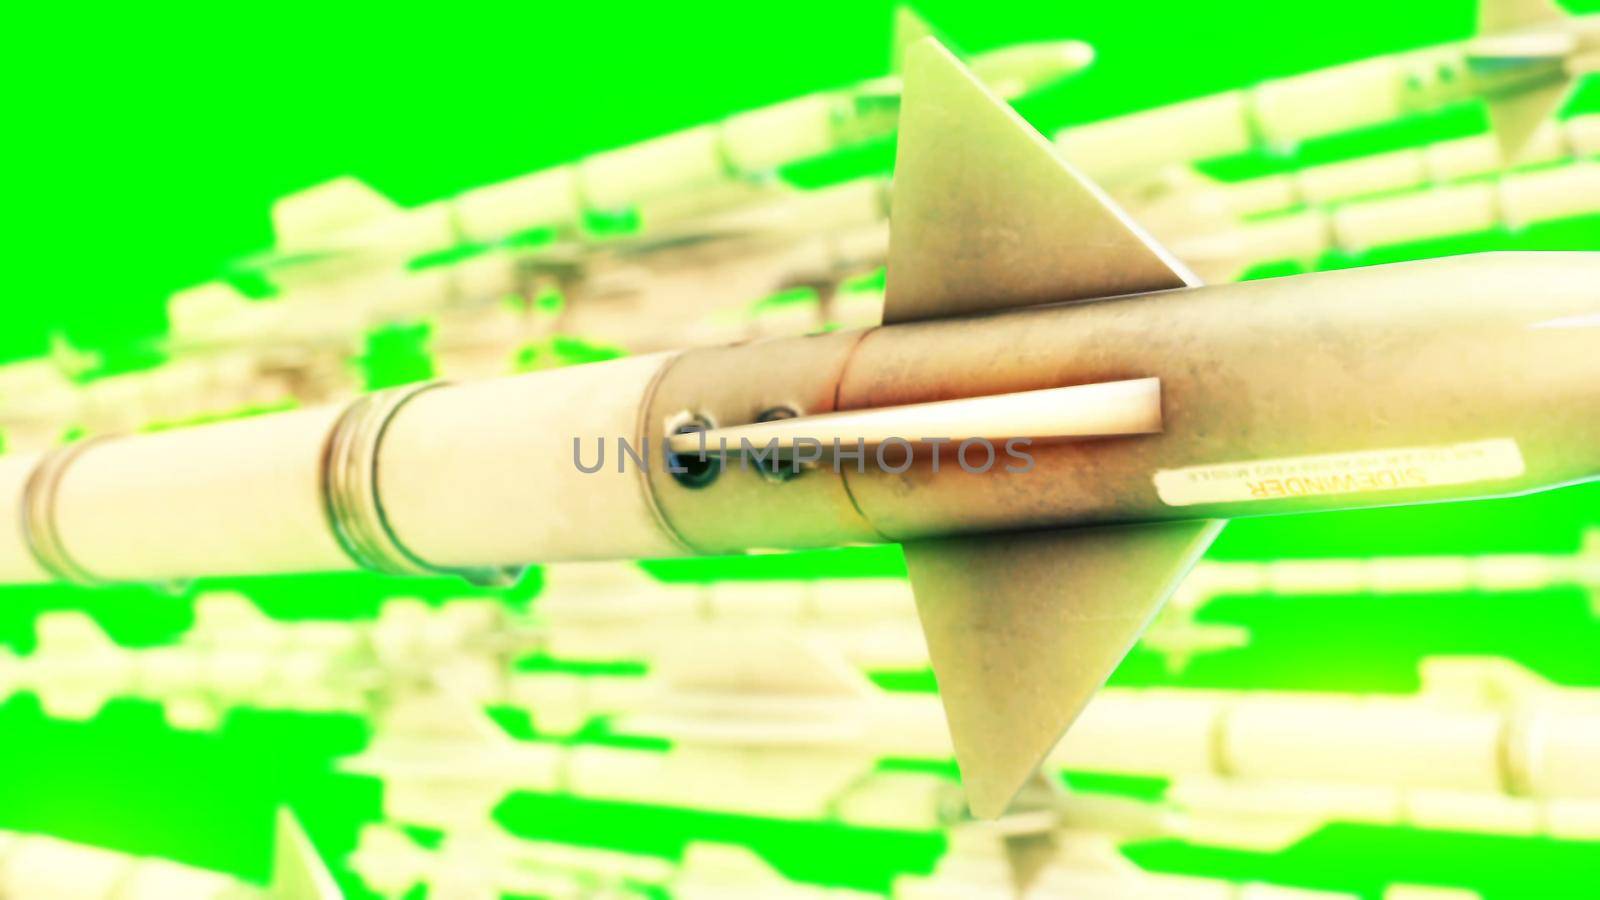 missiles on green screen. 3D rendering by designprojects